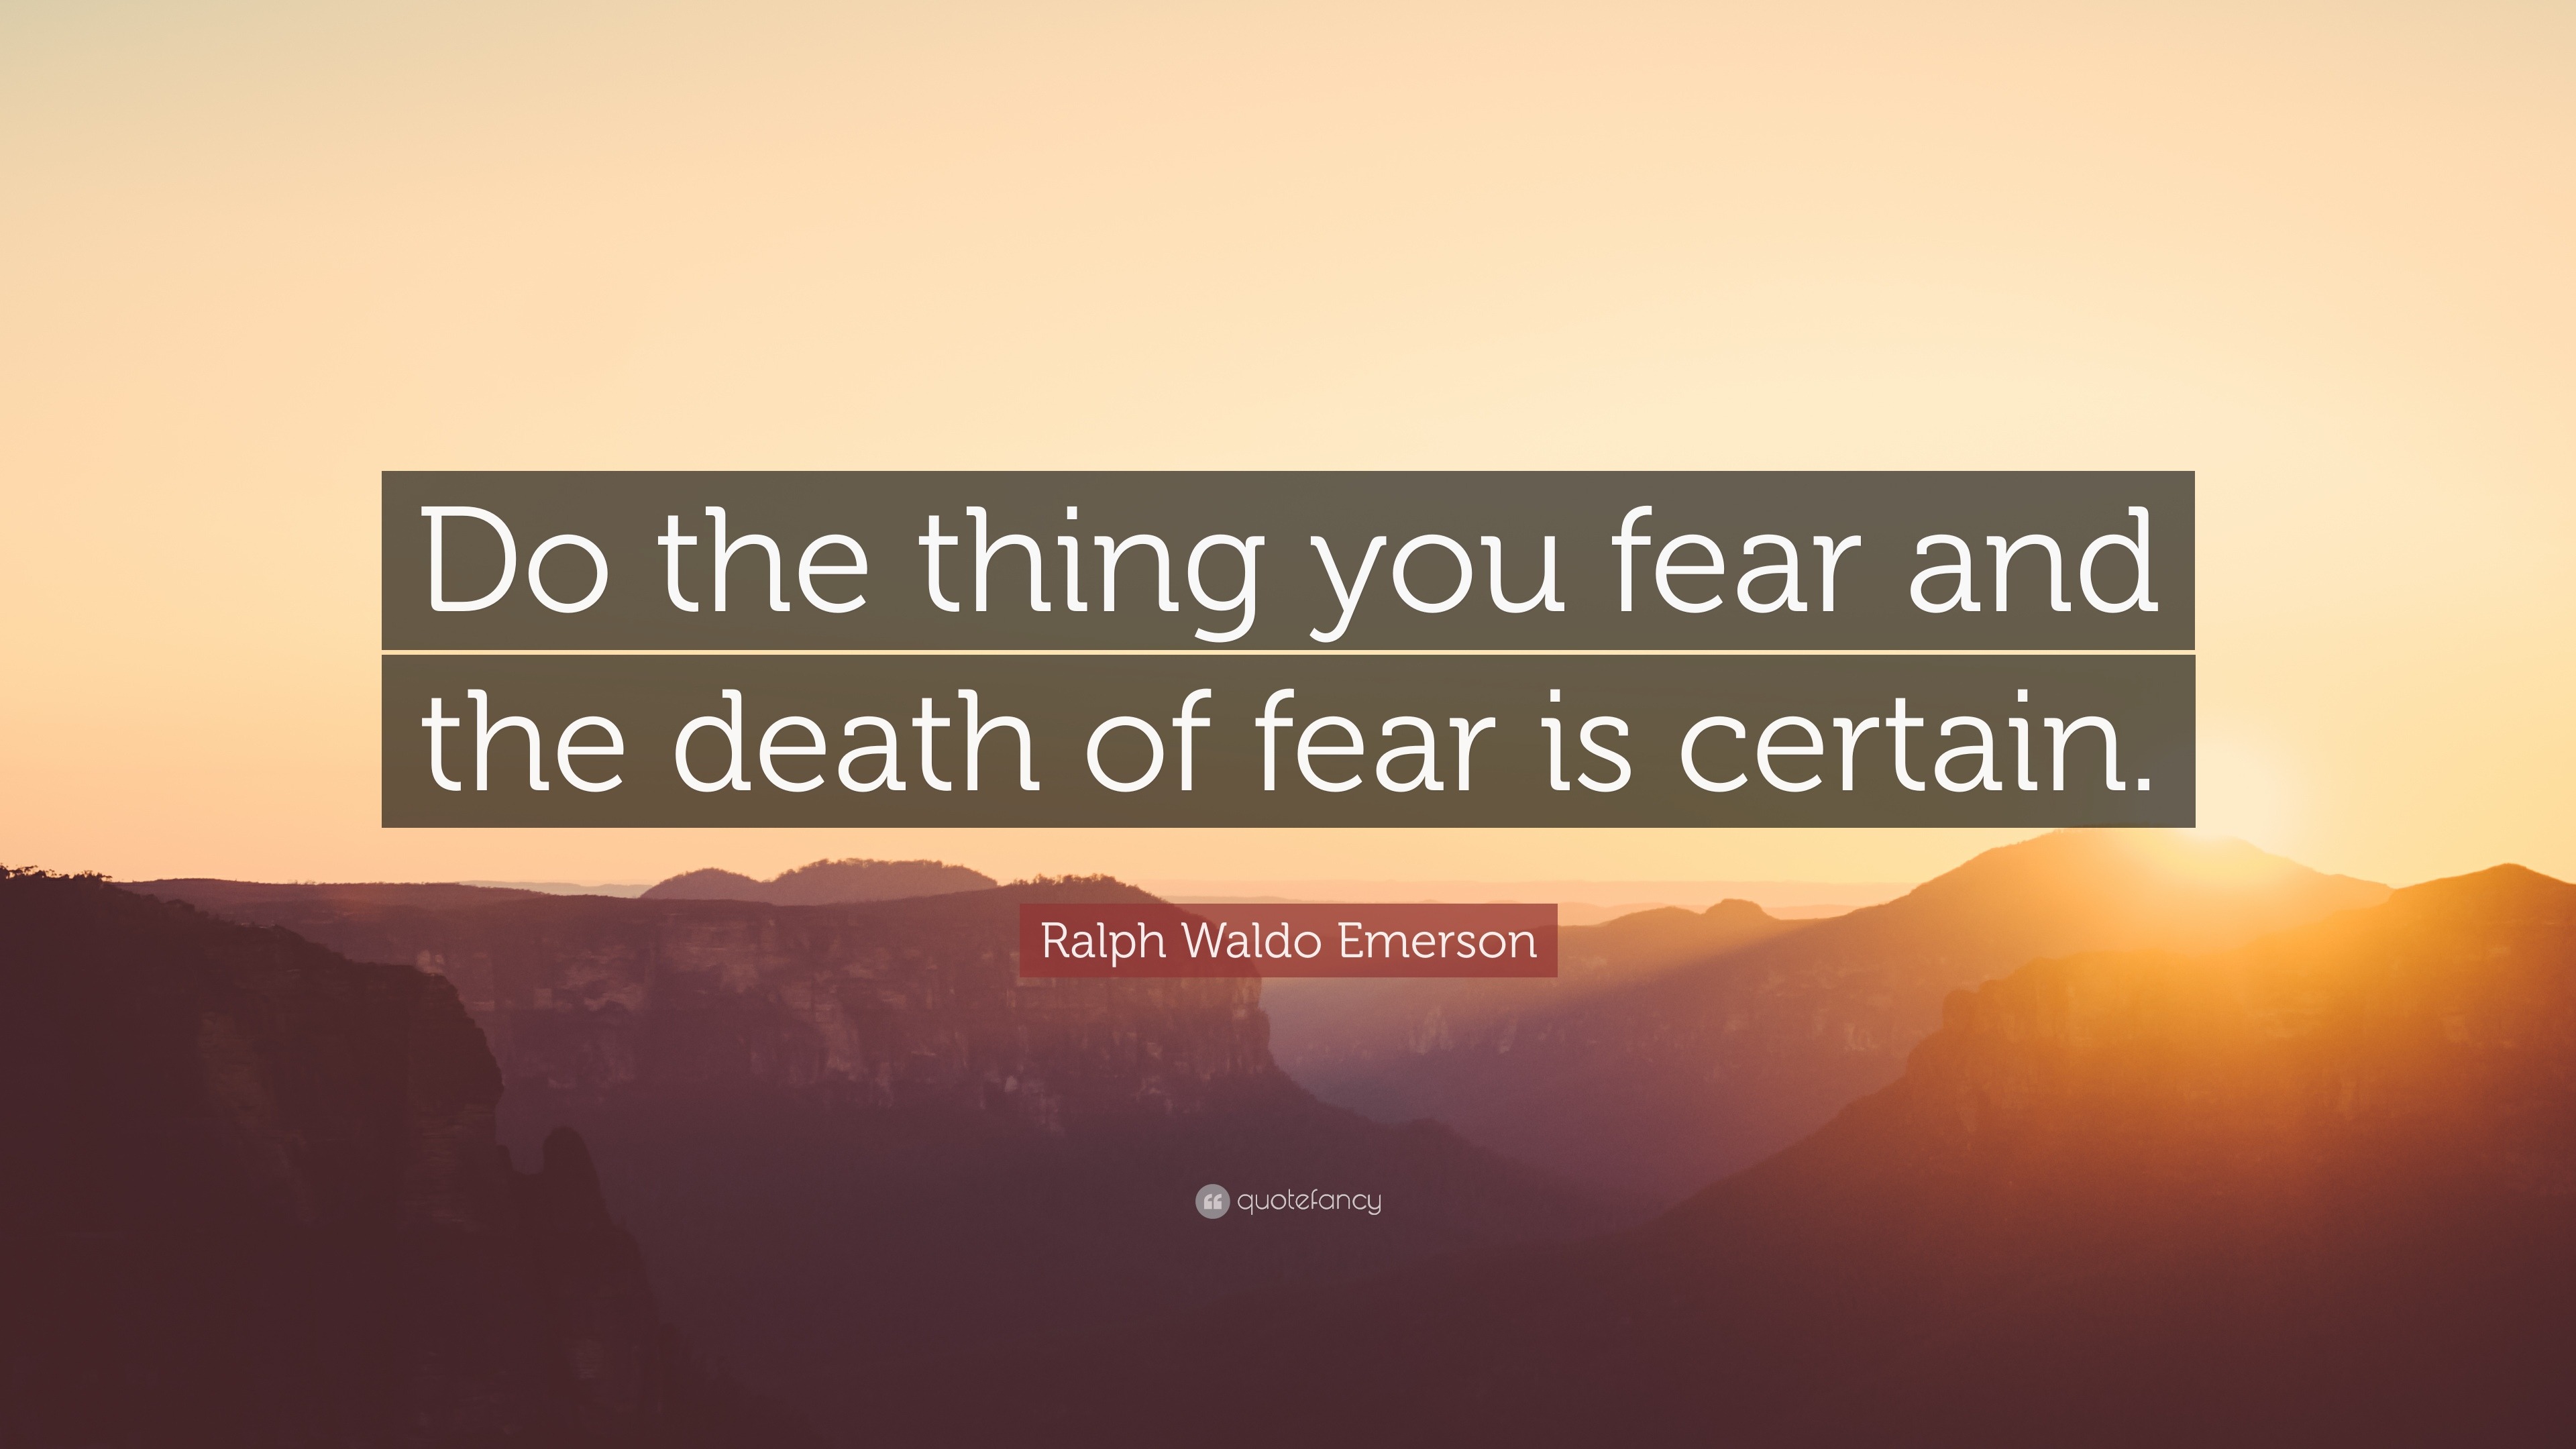 Ralph Waldo Emerson Quote Do The Thing You Fear And The Death Of Fear Is Certain